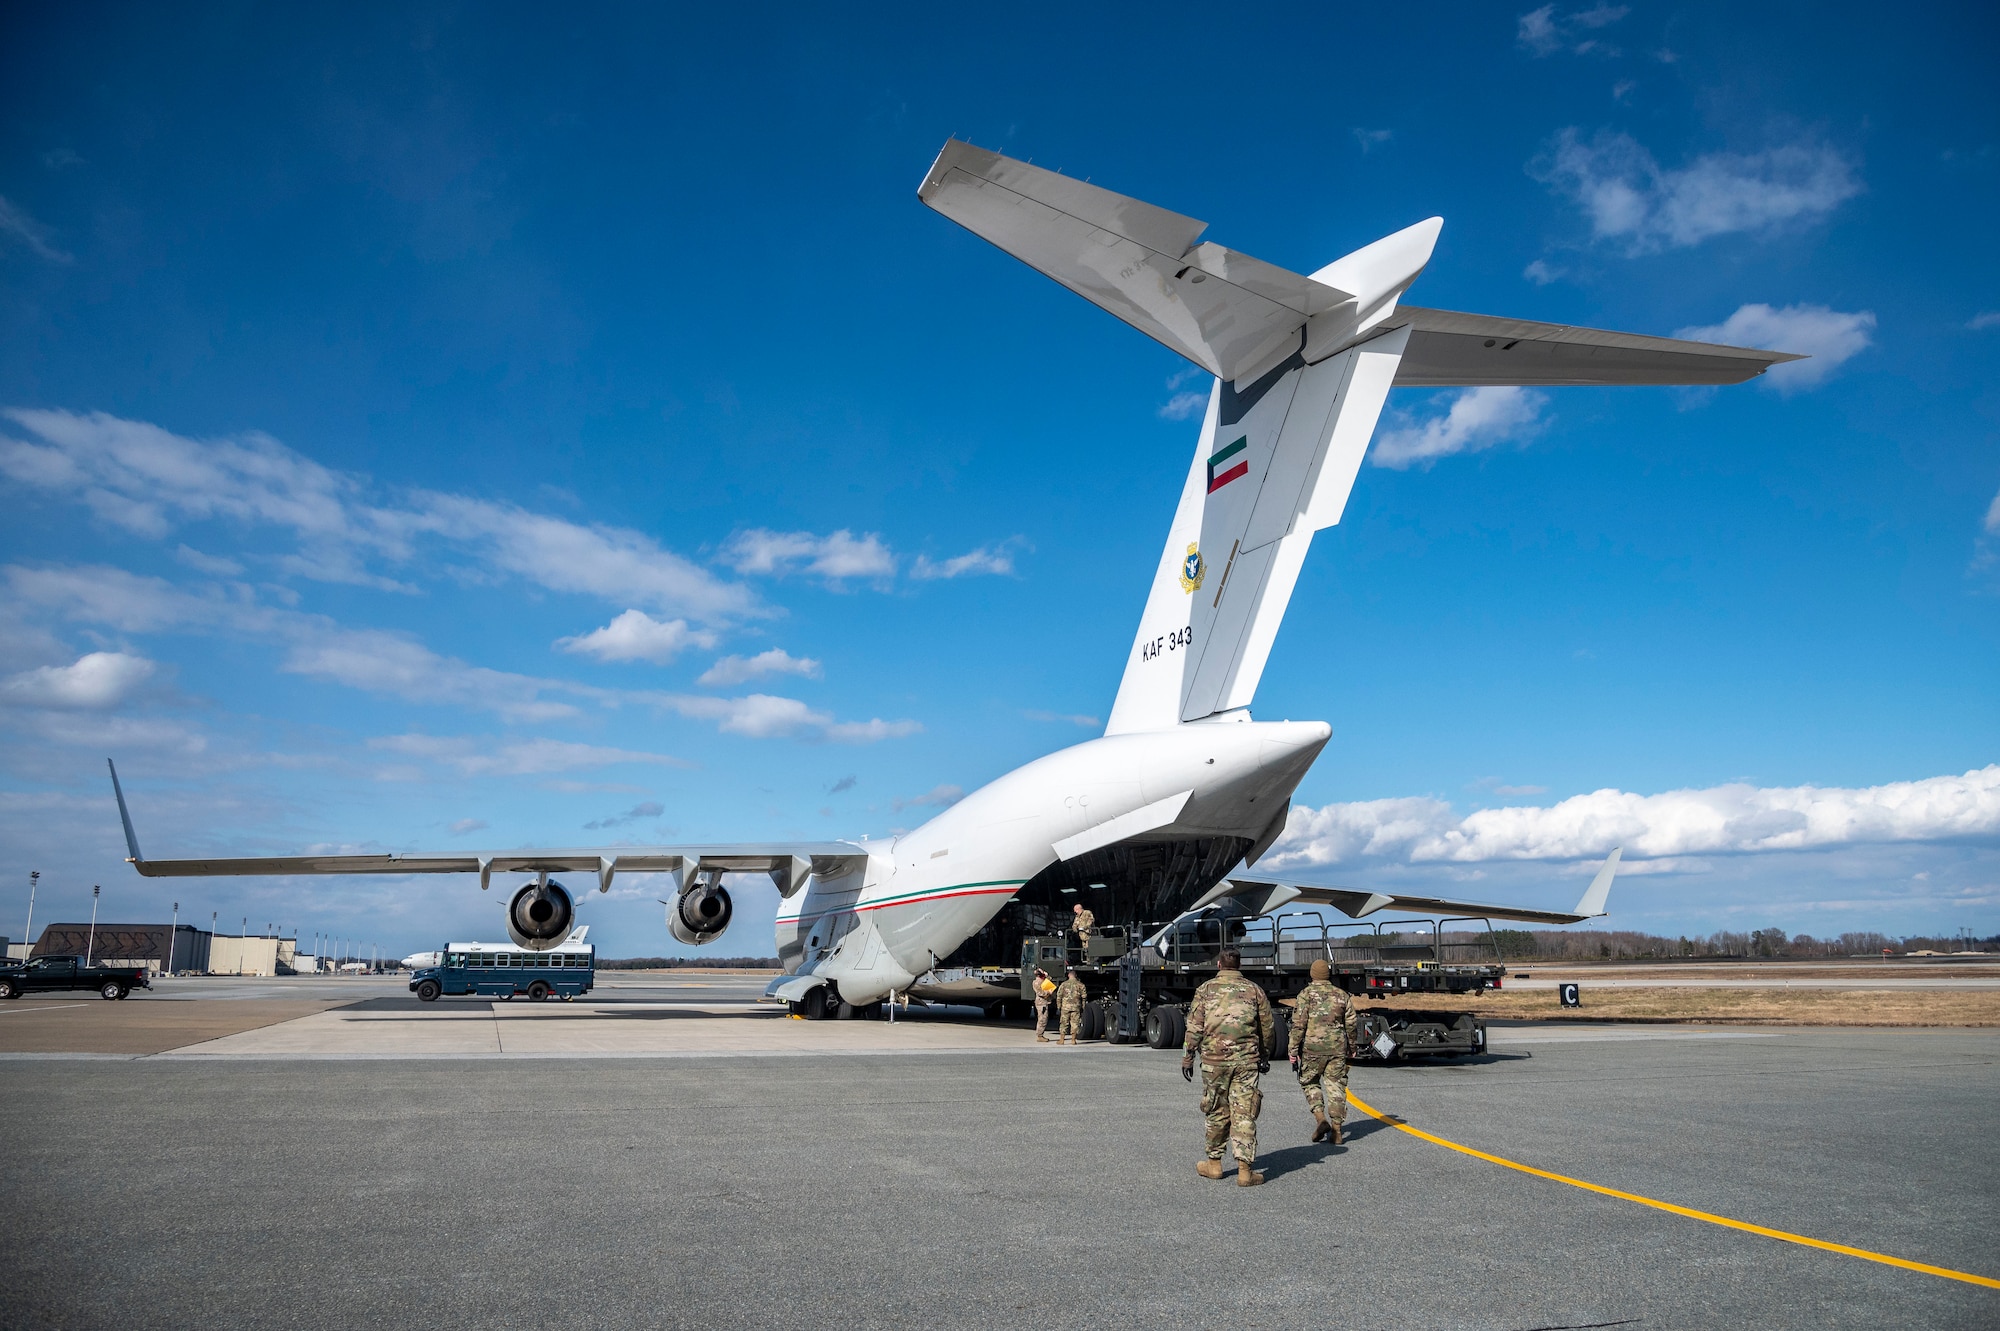 Airmen from the 436th Aerial Port Squadron finish loading cargo in support of a foreign military sales operation with the Kuwait air force at Dover Air Force Base, Delaware, Jan. 22, 2021. Kuwait is an important partner in U.S. counterterrorism efforts, providing assistance in the military, diplomatic, and intelligence arenas and also supporting efforts to block financing of terrorist groups. Due to its strategic geographic location, Dover AFB supports approximately $3.5 billion worth of foreign military sales operations annually. (U.S. Air Force photo by Senior Airman Christopher Quail)